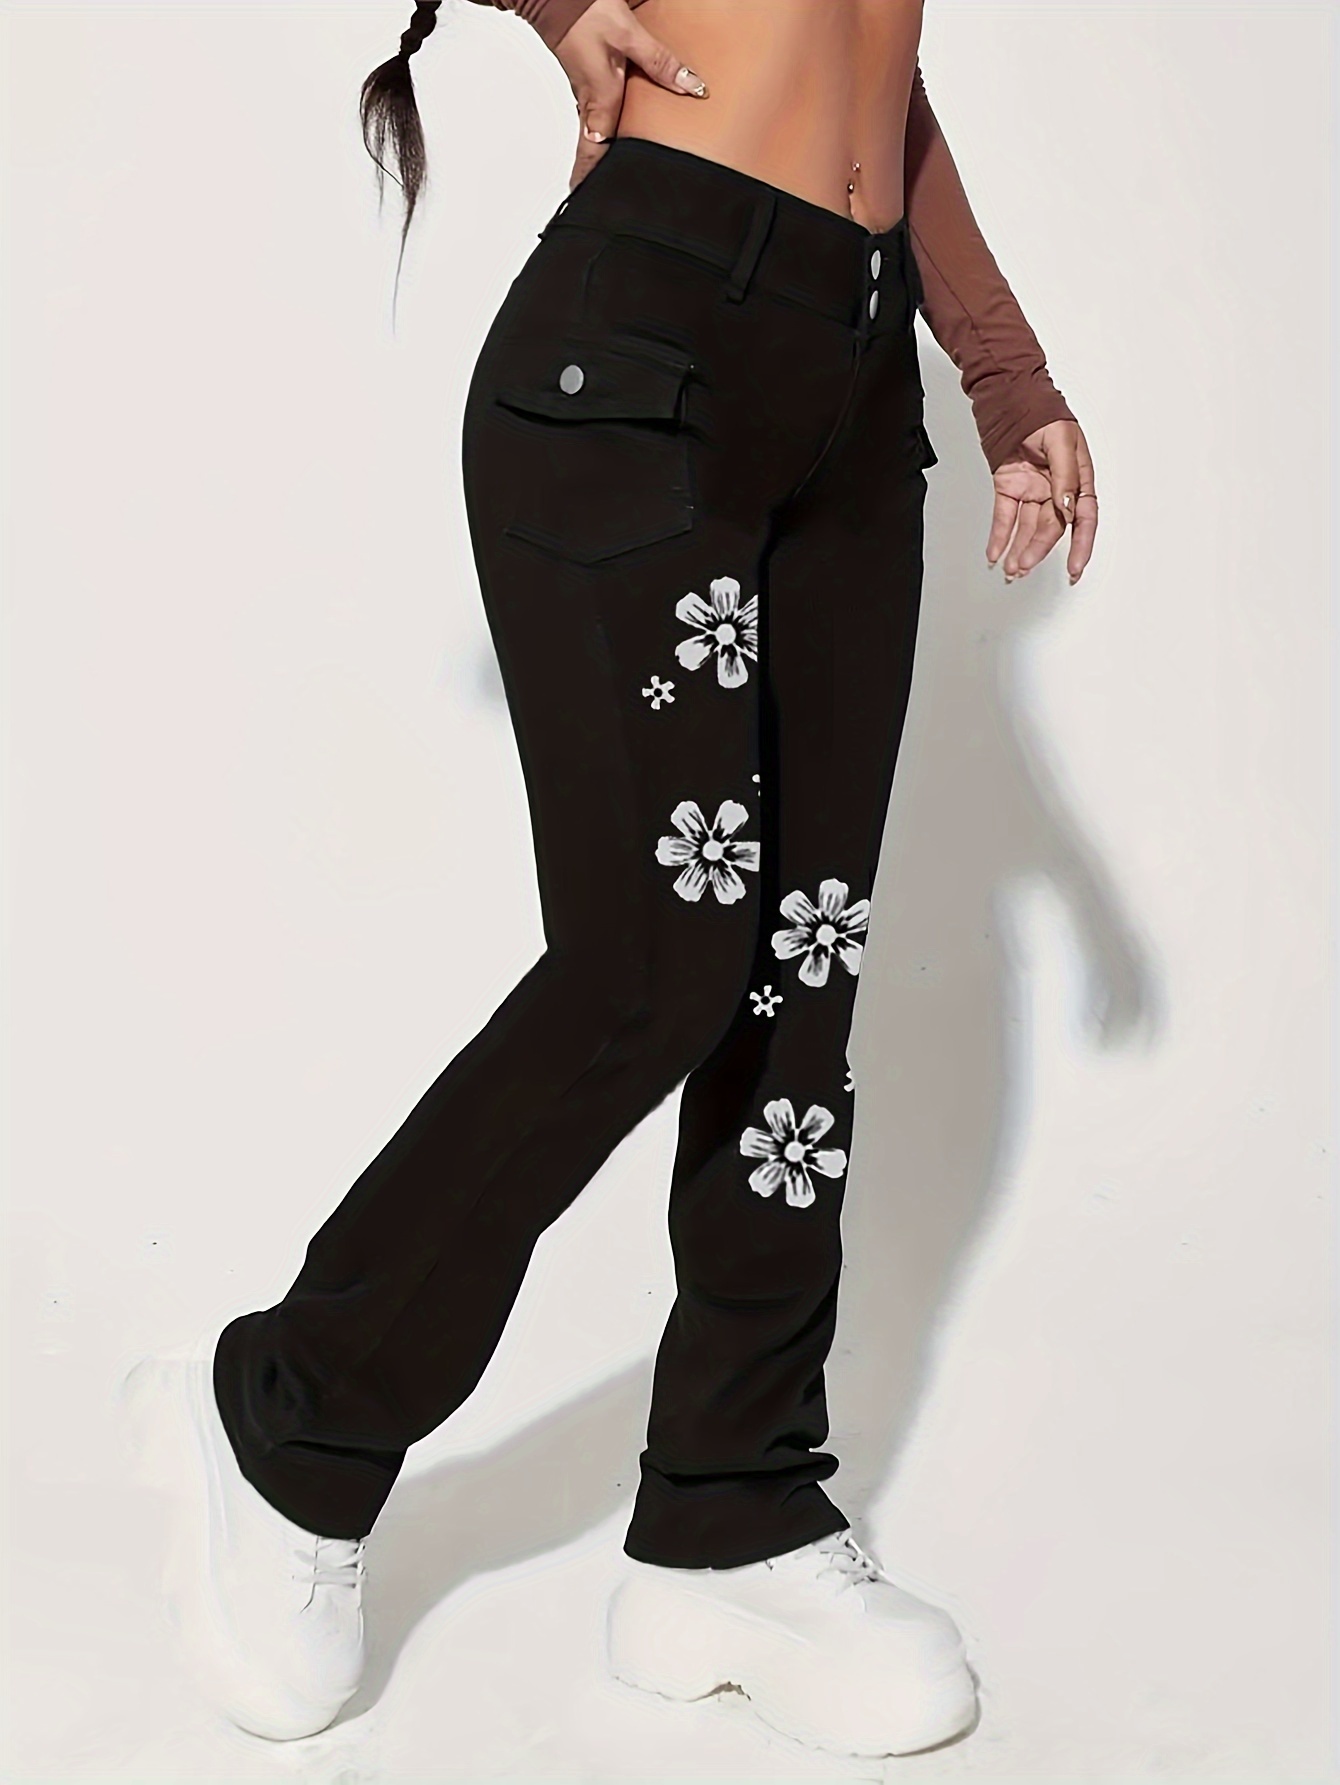 Women's Floral Boot Cut High Waisted Elastic Yoga Pant